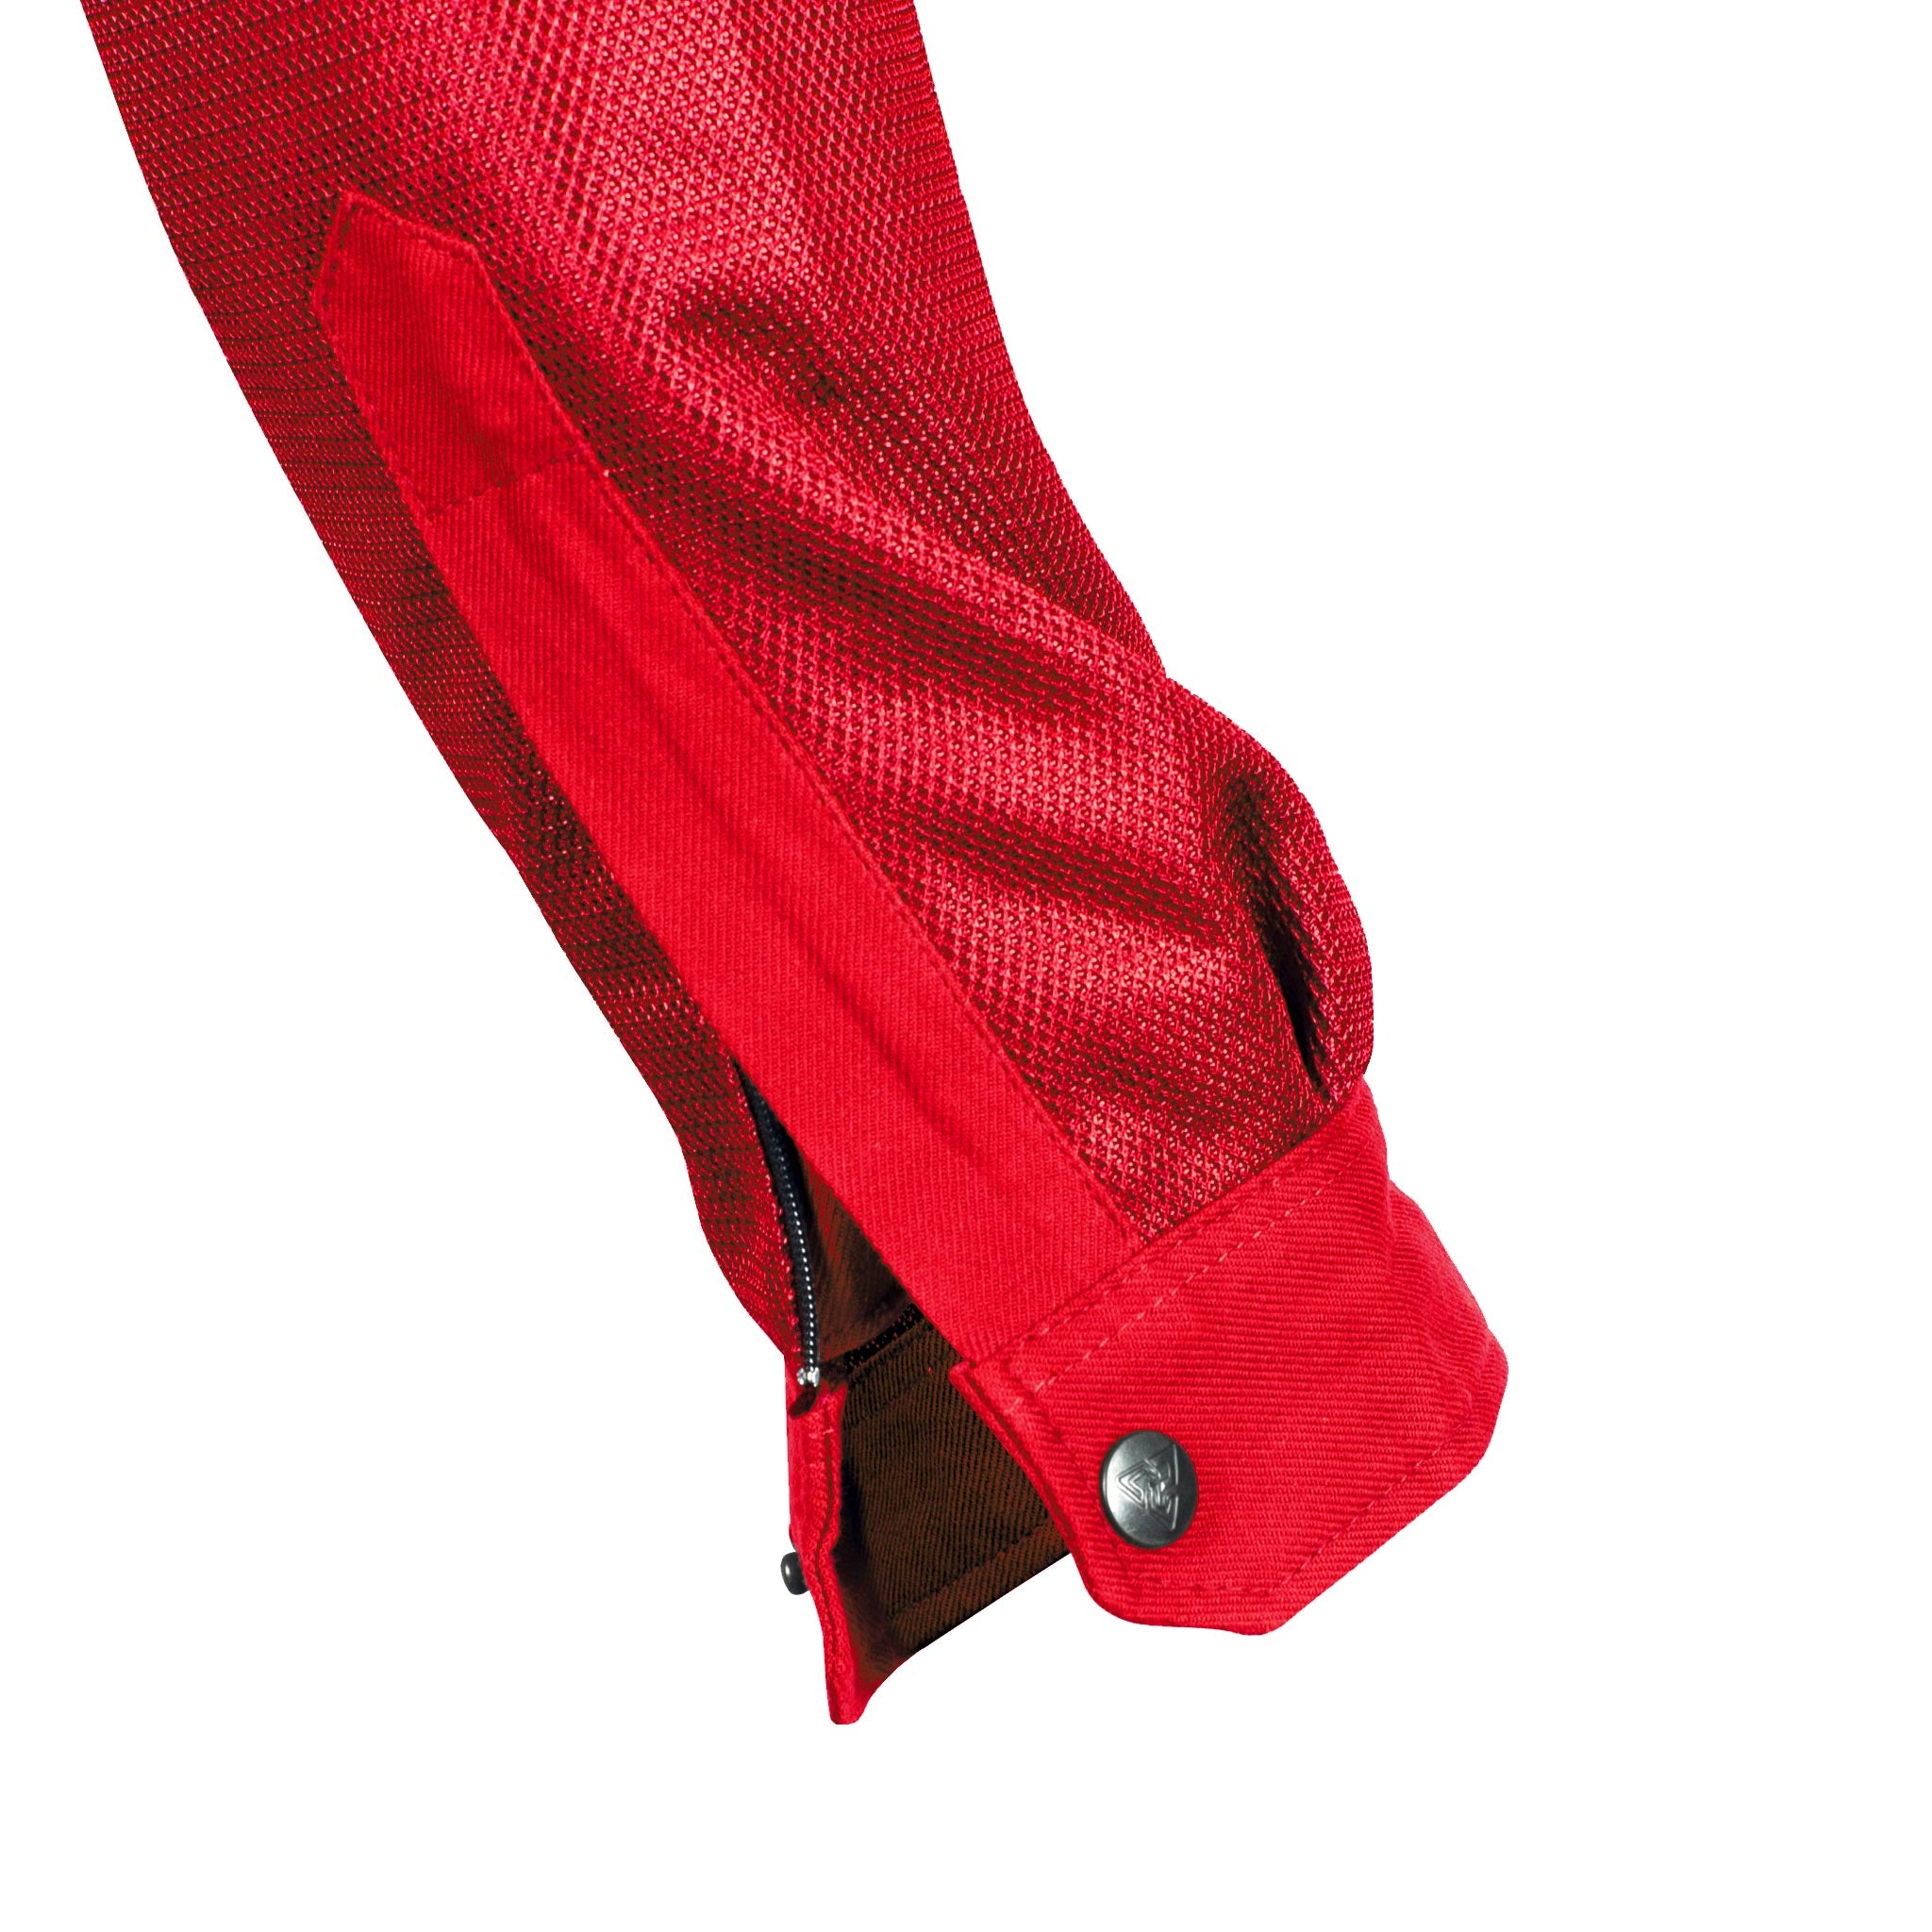 Right-End-Of-Sleeve-Of-Summer-Mesh-Shirt-In-Red-Solid-For-Men